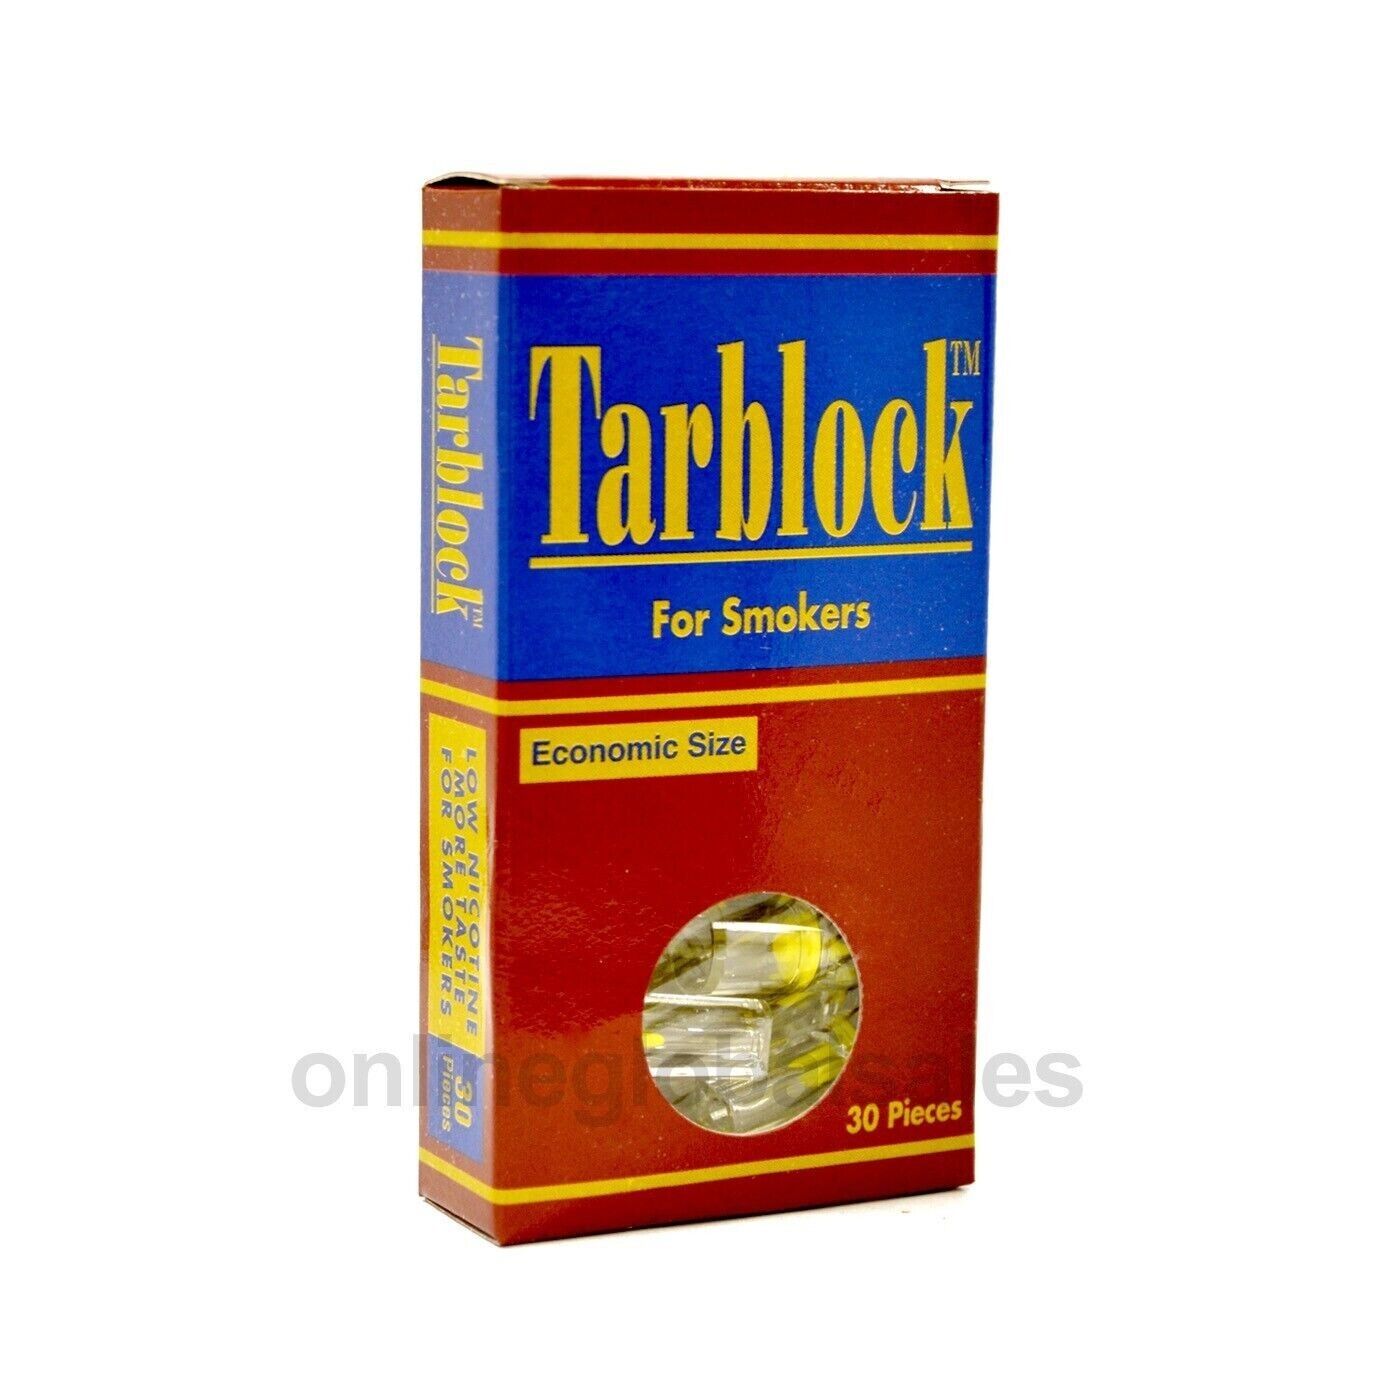 TARBLOCK Cigarette Filter Tips 1 Pack (30 filters) Remove tar & nicotine, out